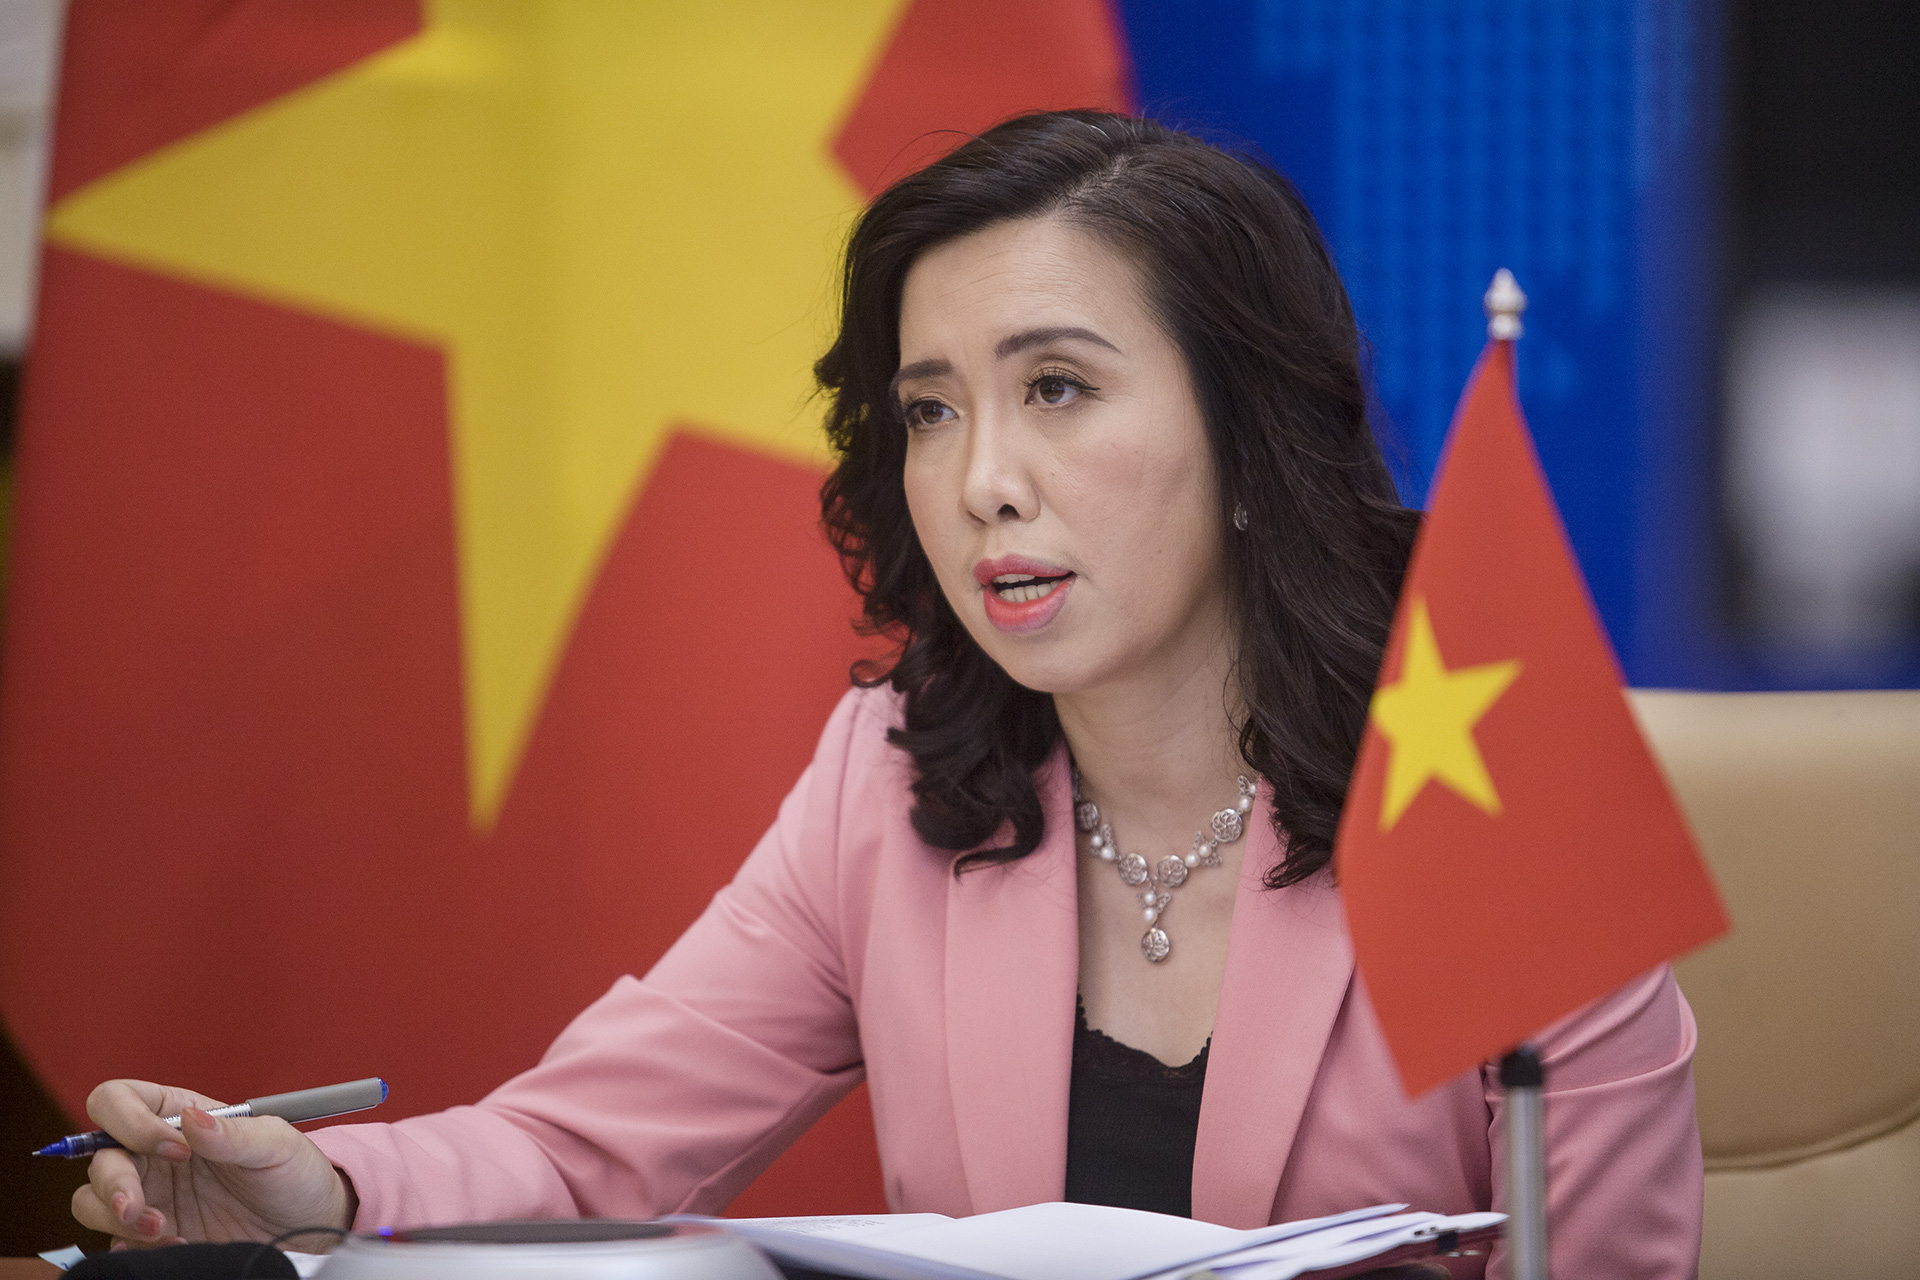 Foreign citizens in Vietnam to be vaccinated against COVID-19: foreign ministry spokesperson